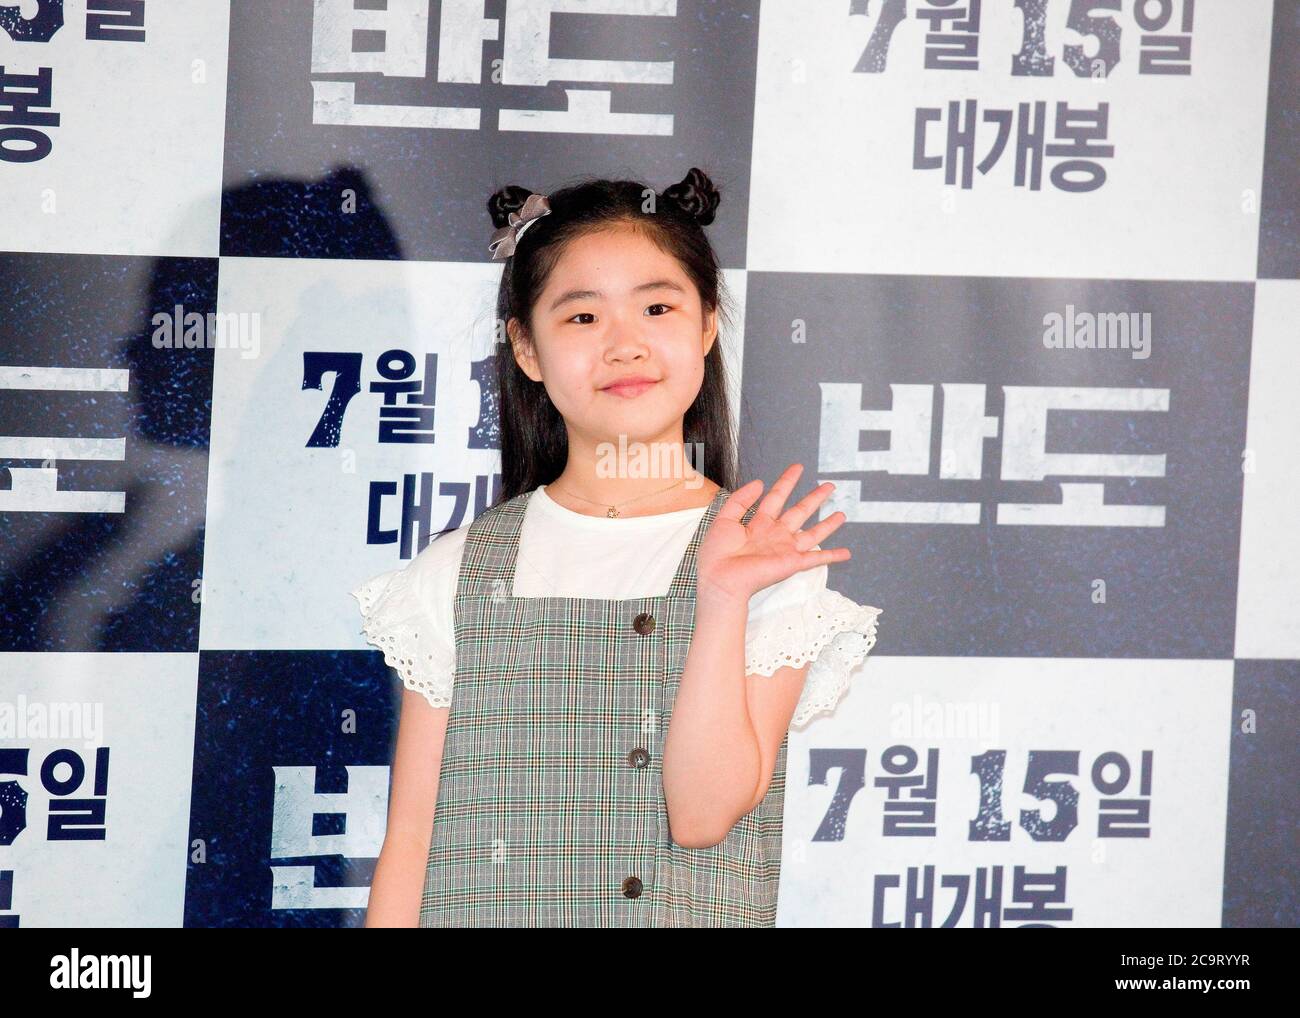 Lee Ye Won July 9 South Korean Child Actress Lee Ye Won Attends A Press Conference For Movie Peninsula In Seoul South Korea Movie Peninsula Is A Sequel To 16 Zombie Blockbuster